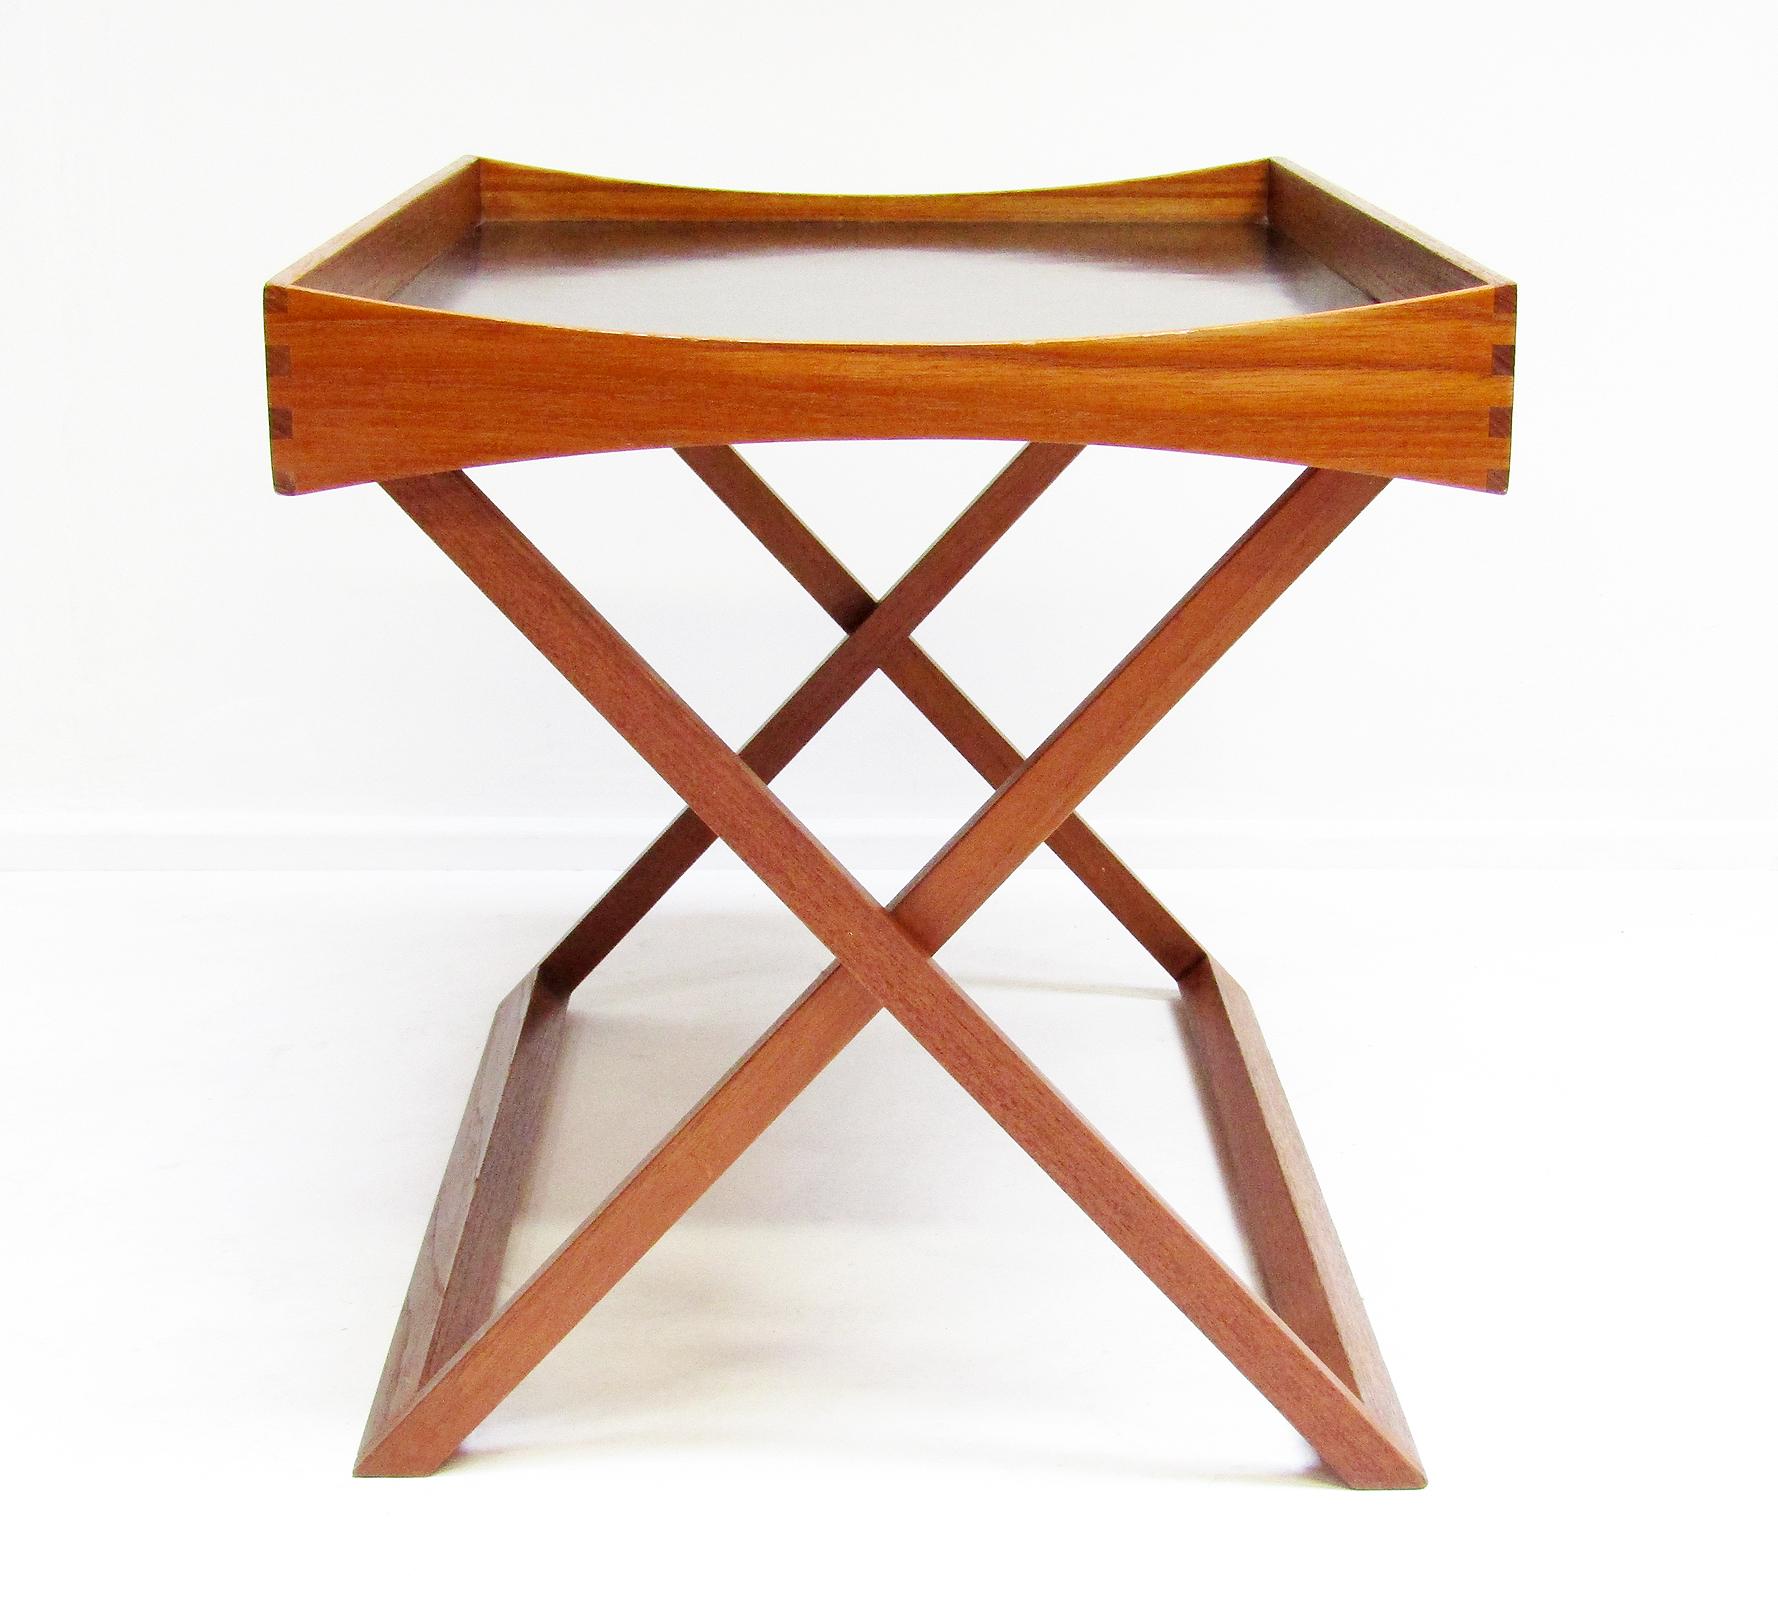 20th Century 1960s Danish Folding Campaign Side Table In Teak By Torsten Johansson For Bo Ex For Sale